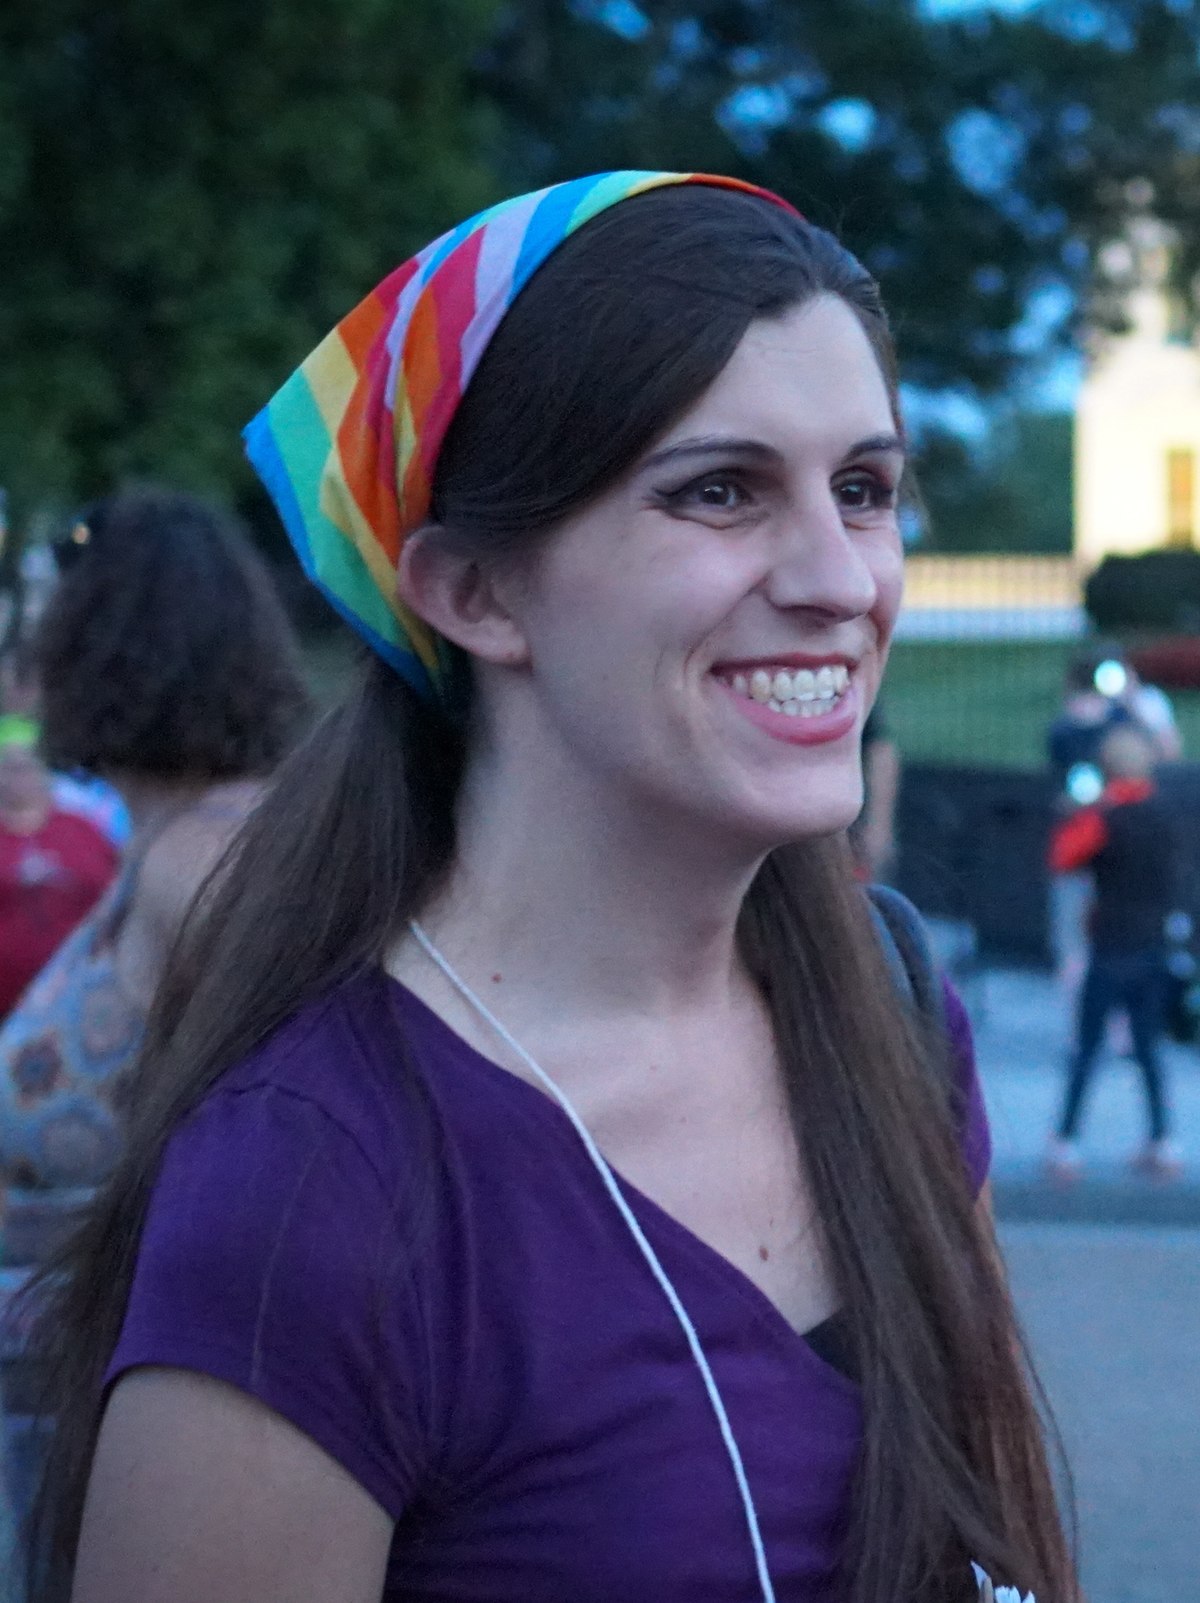 A picture cropped to focus on Danica Roem, a transgender woman running as the Democratic candidate in the 2017 election for the 13th District seat in the Virginia House of Delegates.